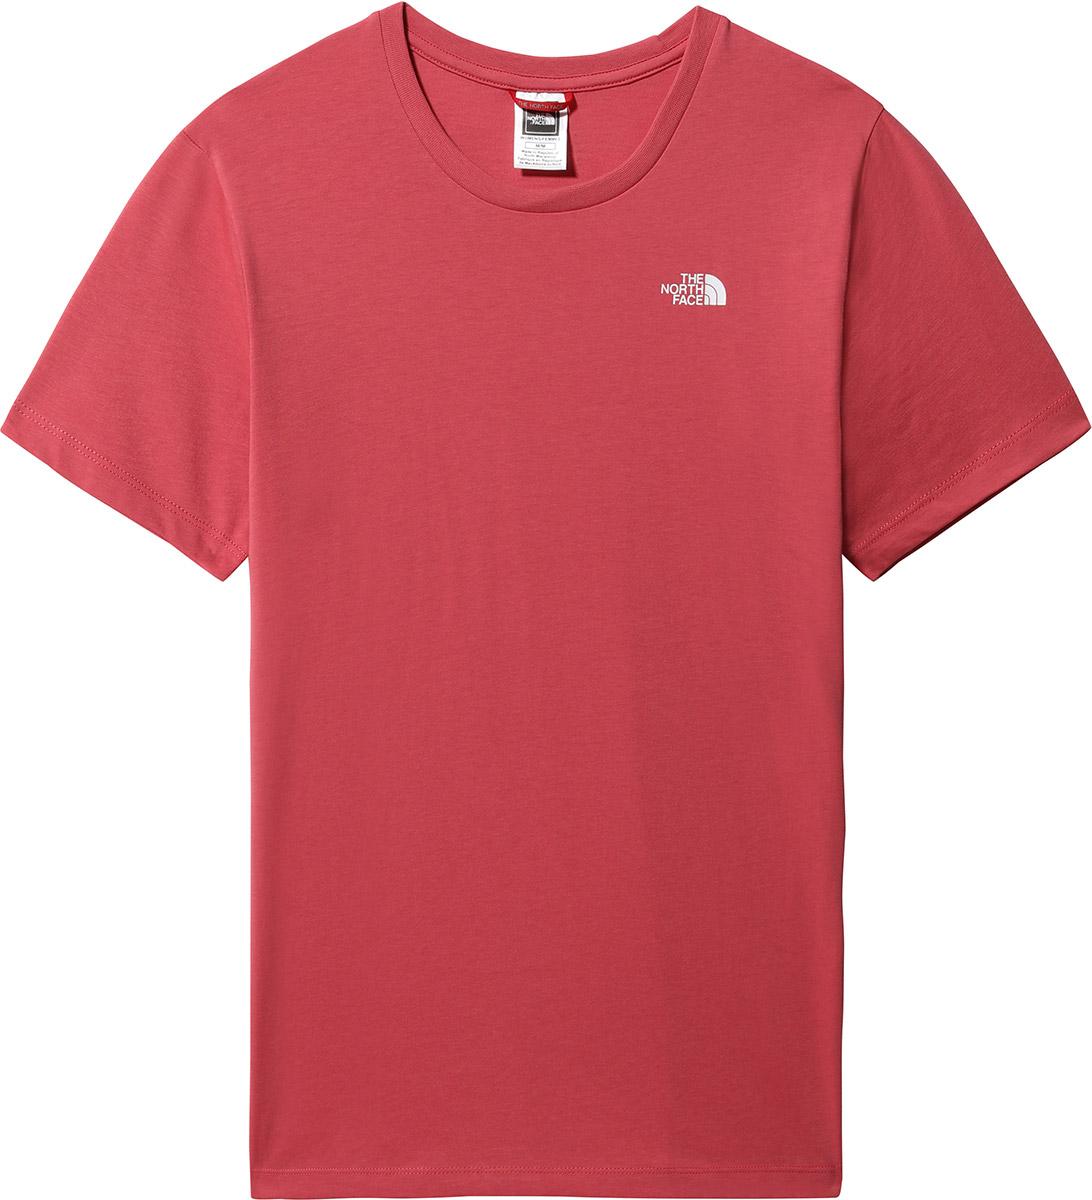 The North Face Womens Short Sleeve Simple Dome Tee - Slate Rose